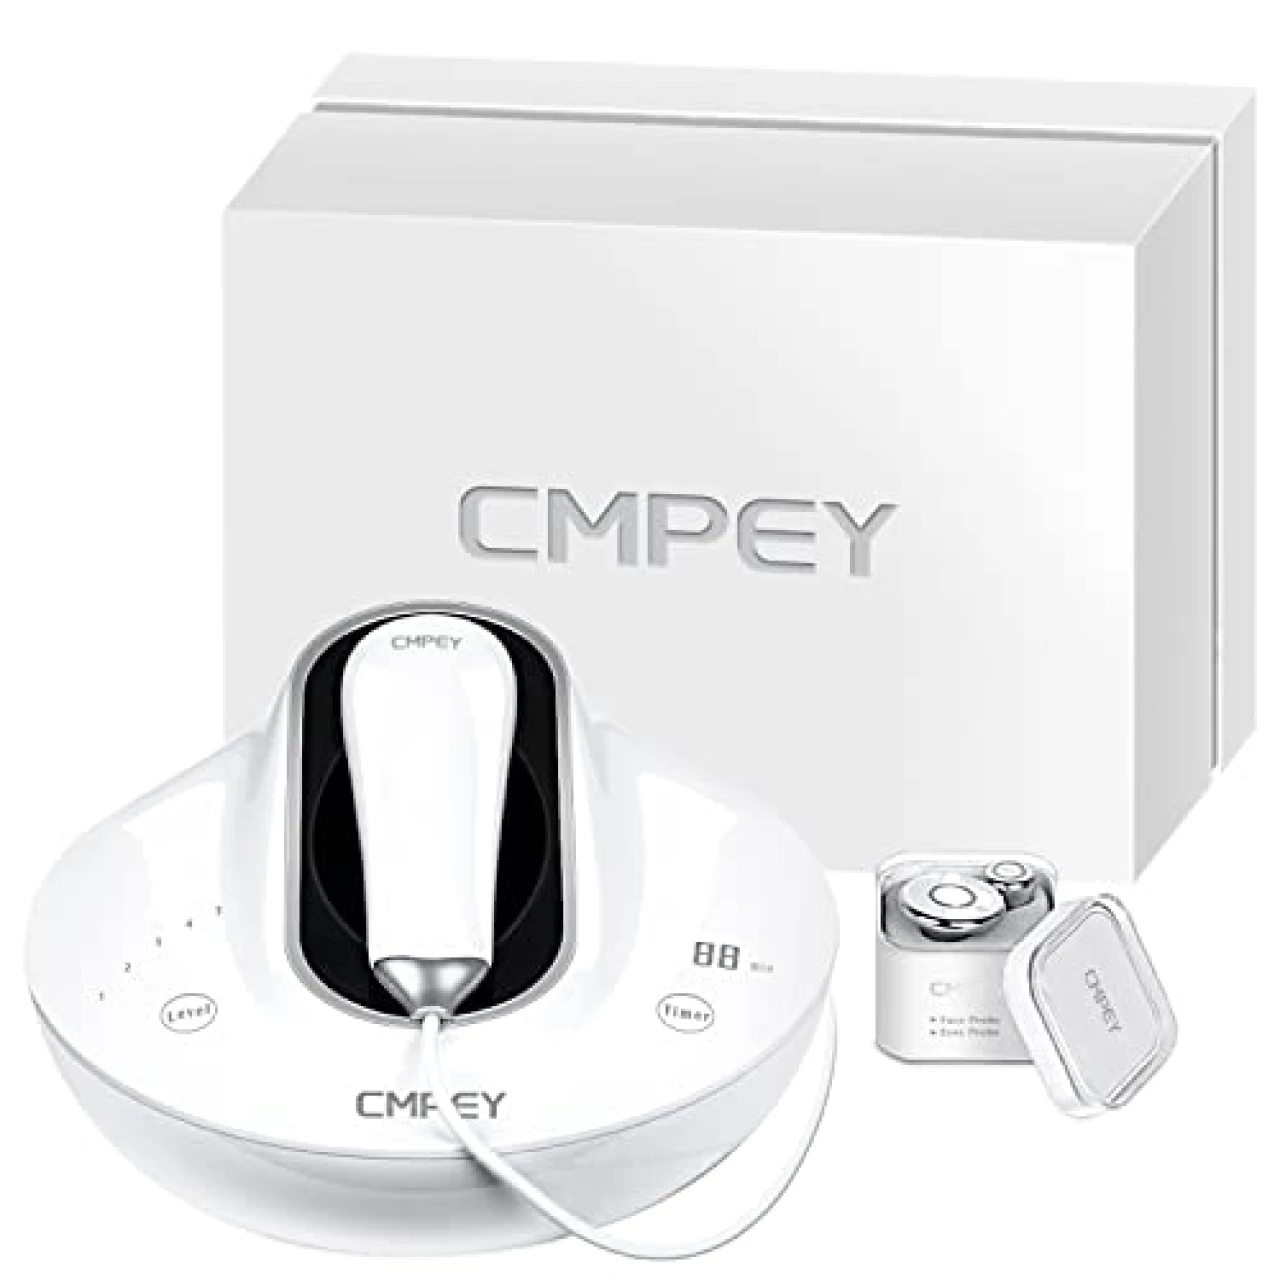 CMPEY Radio Frequency Skin Tightening Machine,Multifunction Home Use Beauty Professional Device,Salon Effects-Wrinkles Remover,Skin Tightening,White